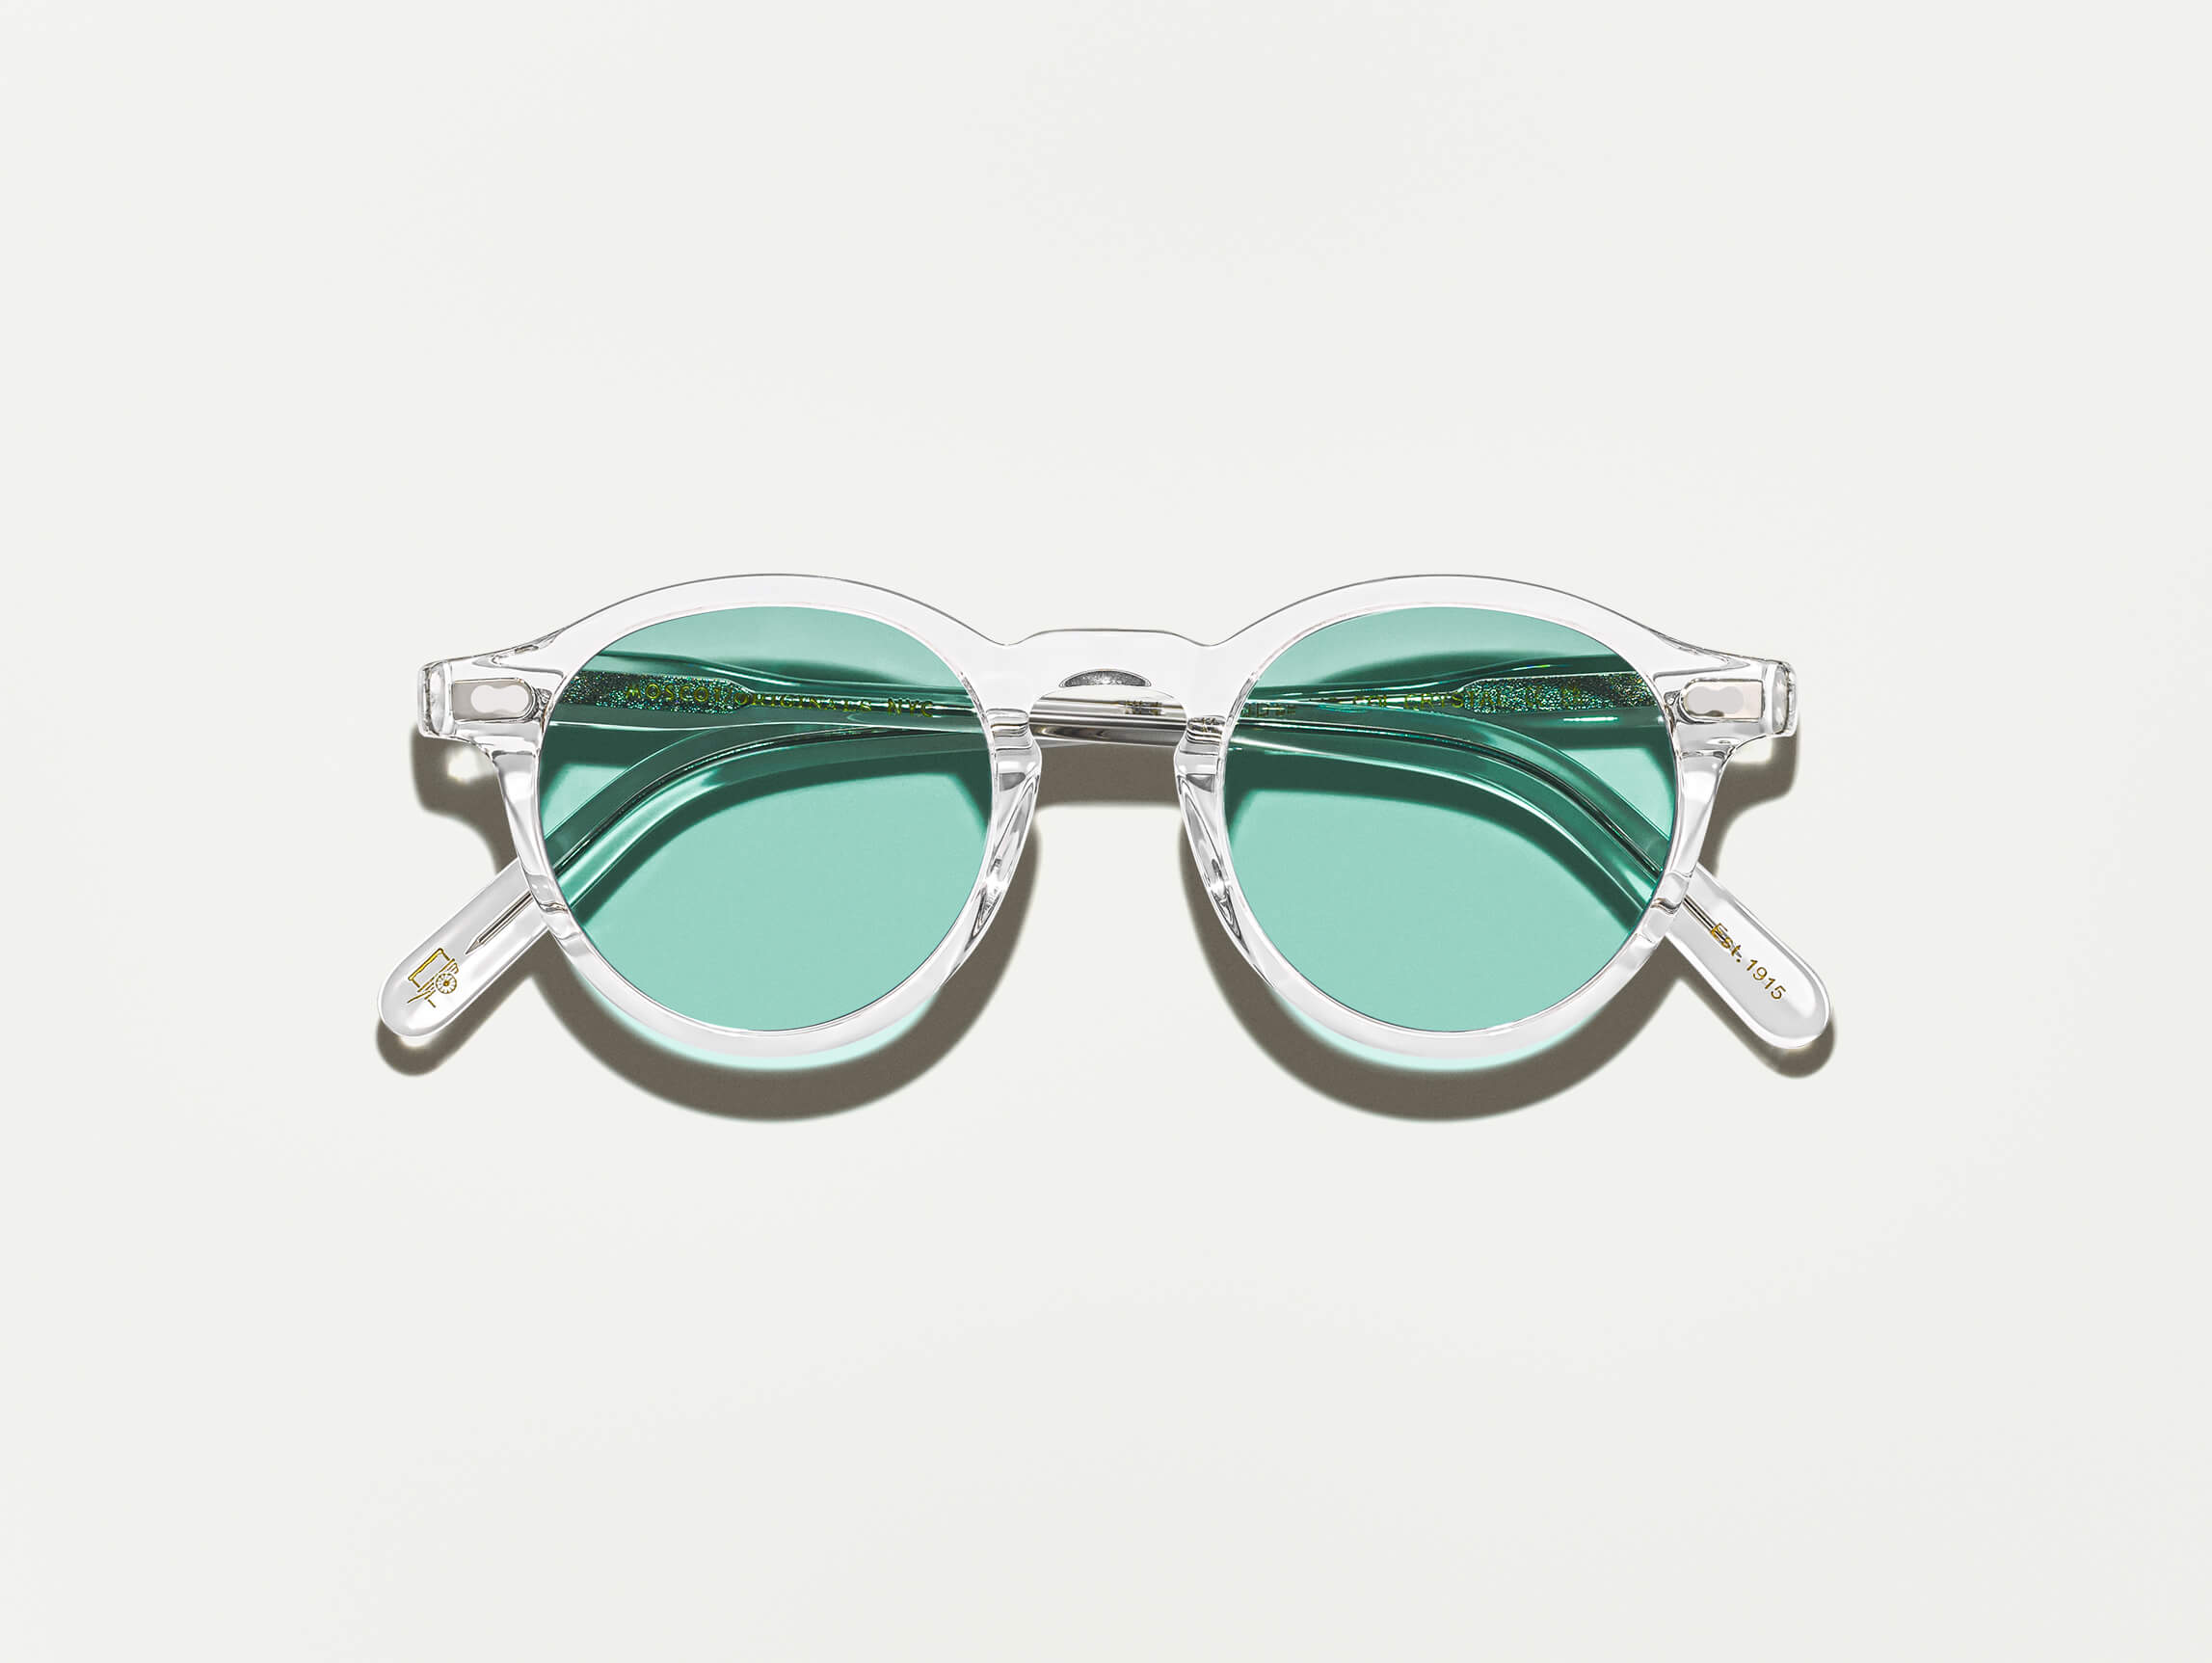 The MILTZEN Crystal with Turquoise Tinted Lenses